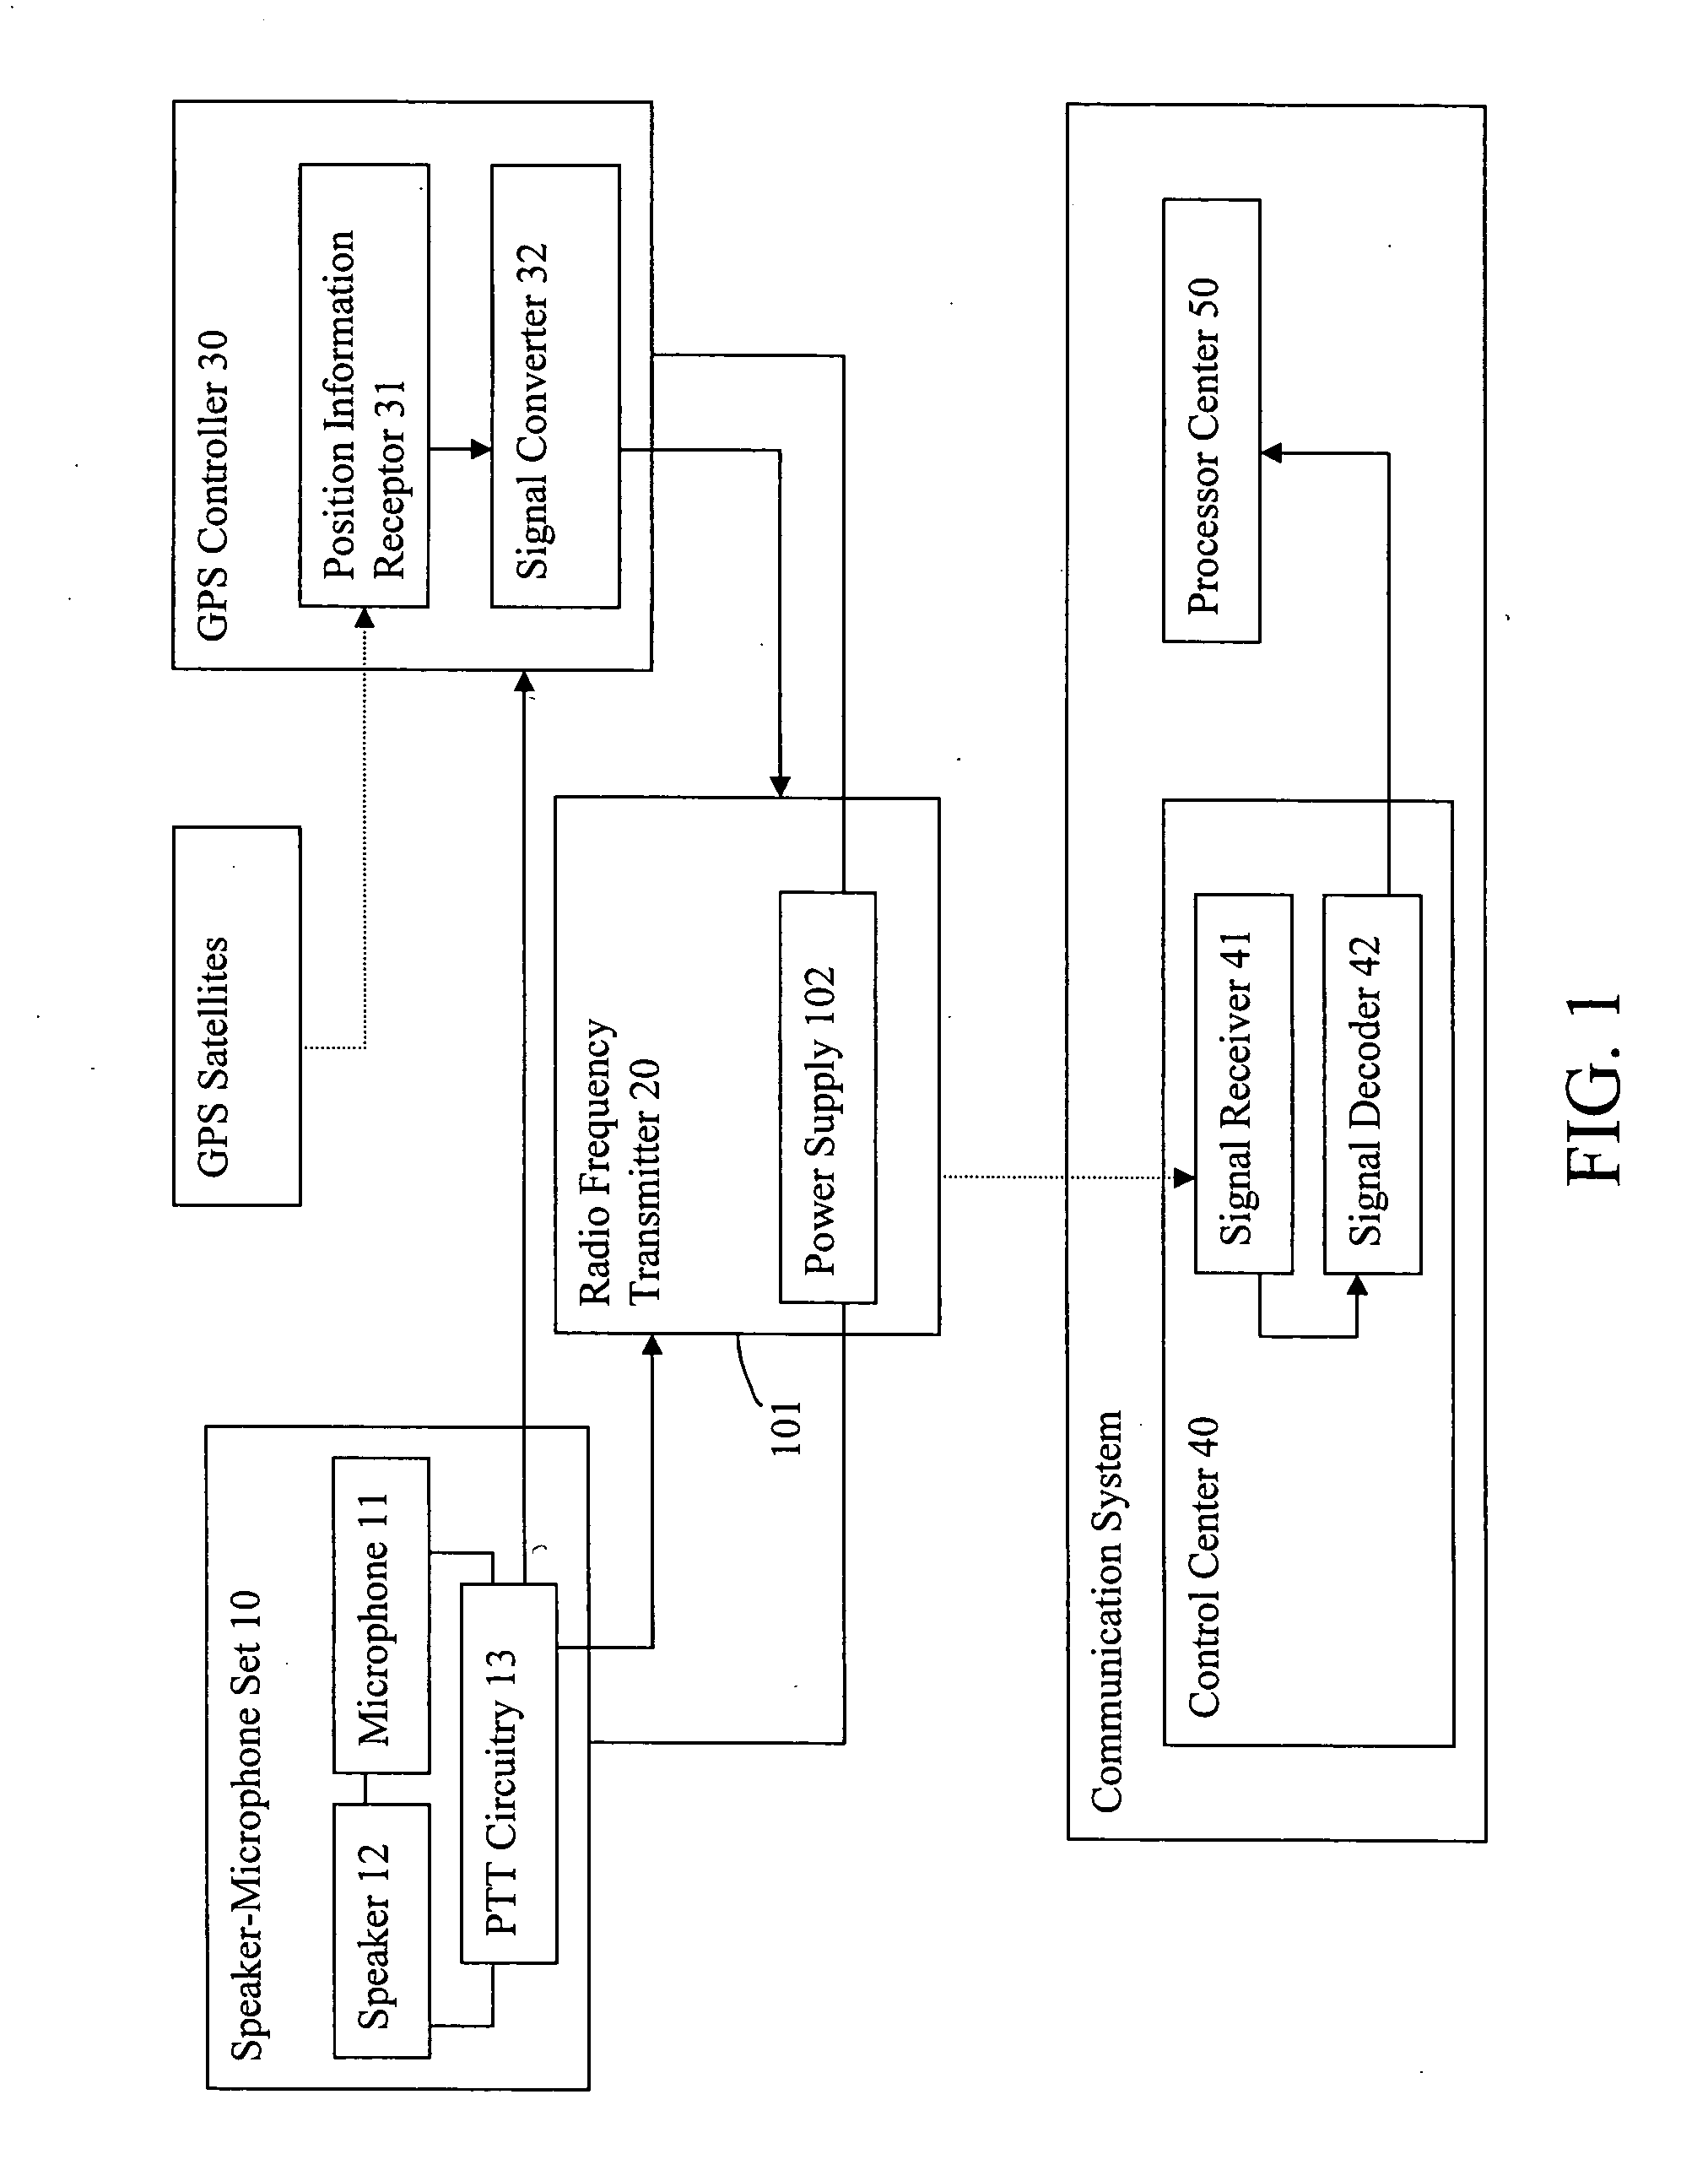 GPS microphone for communication system